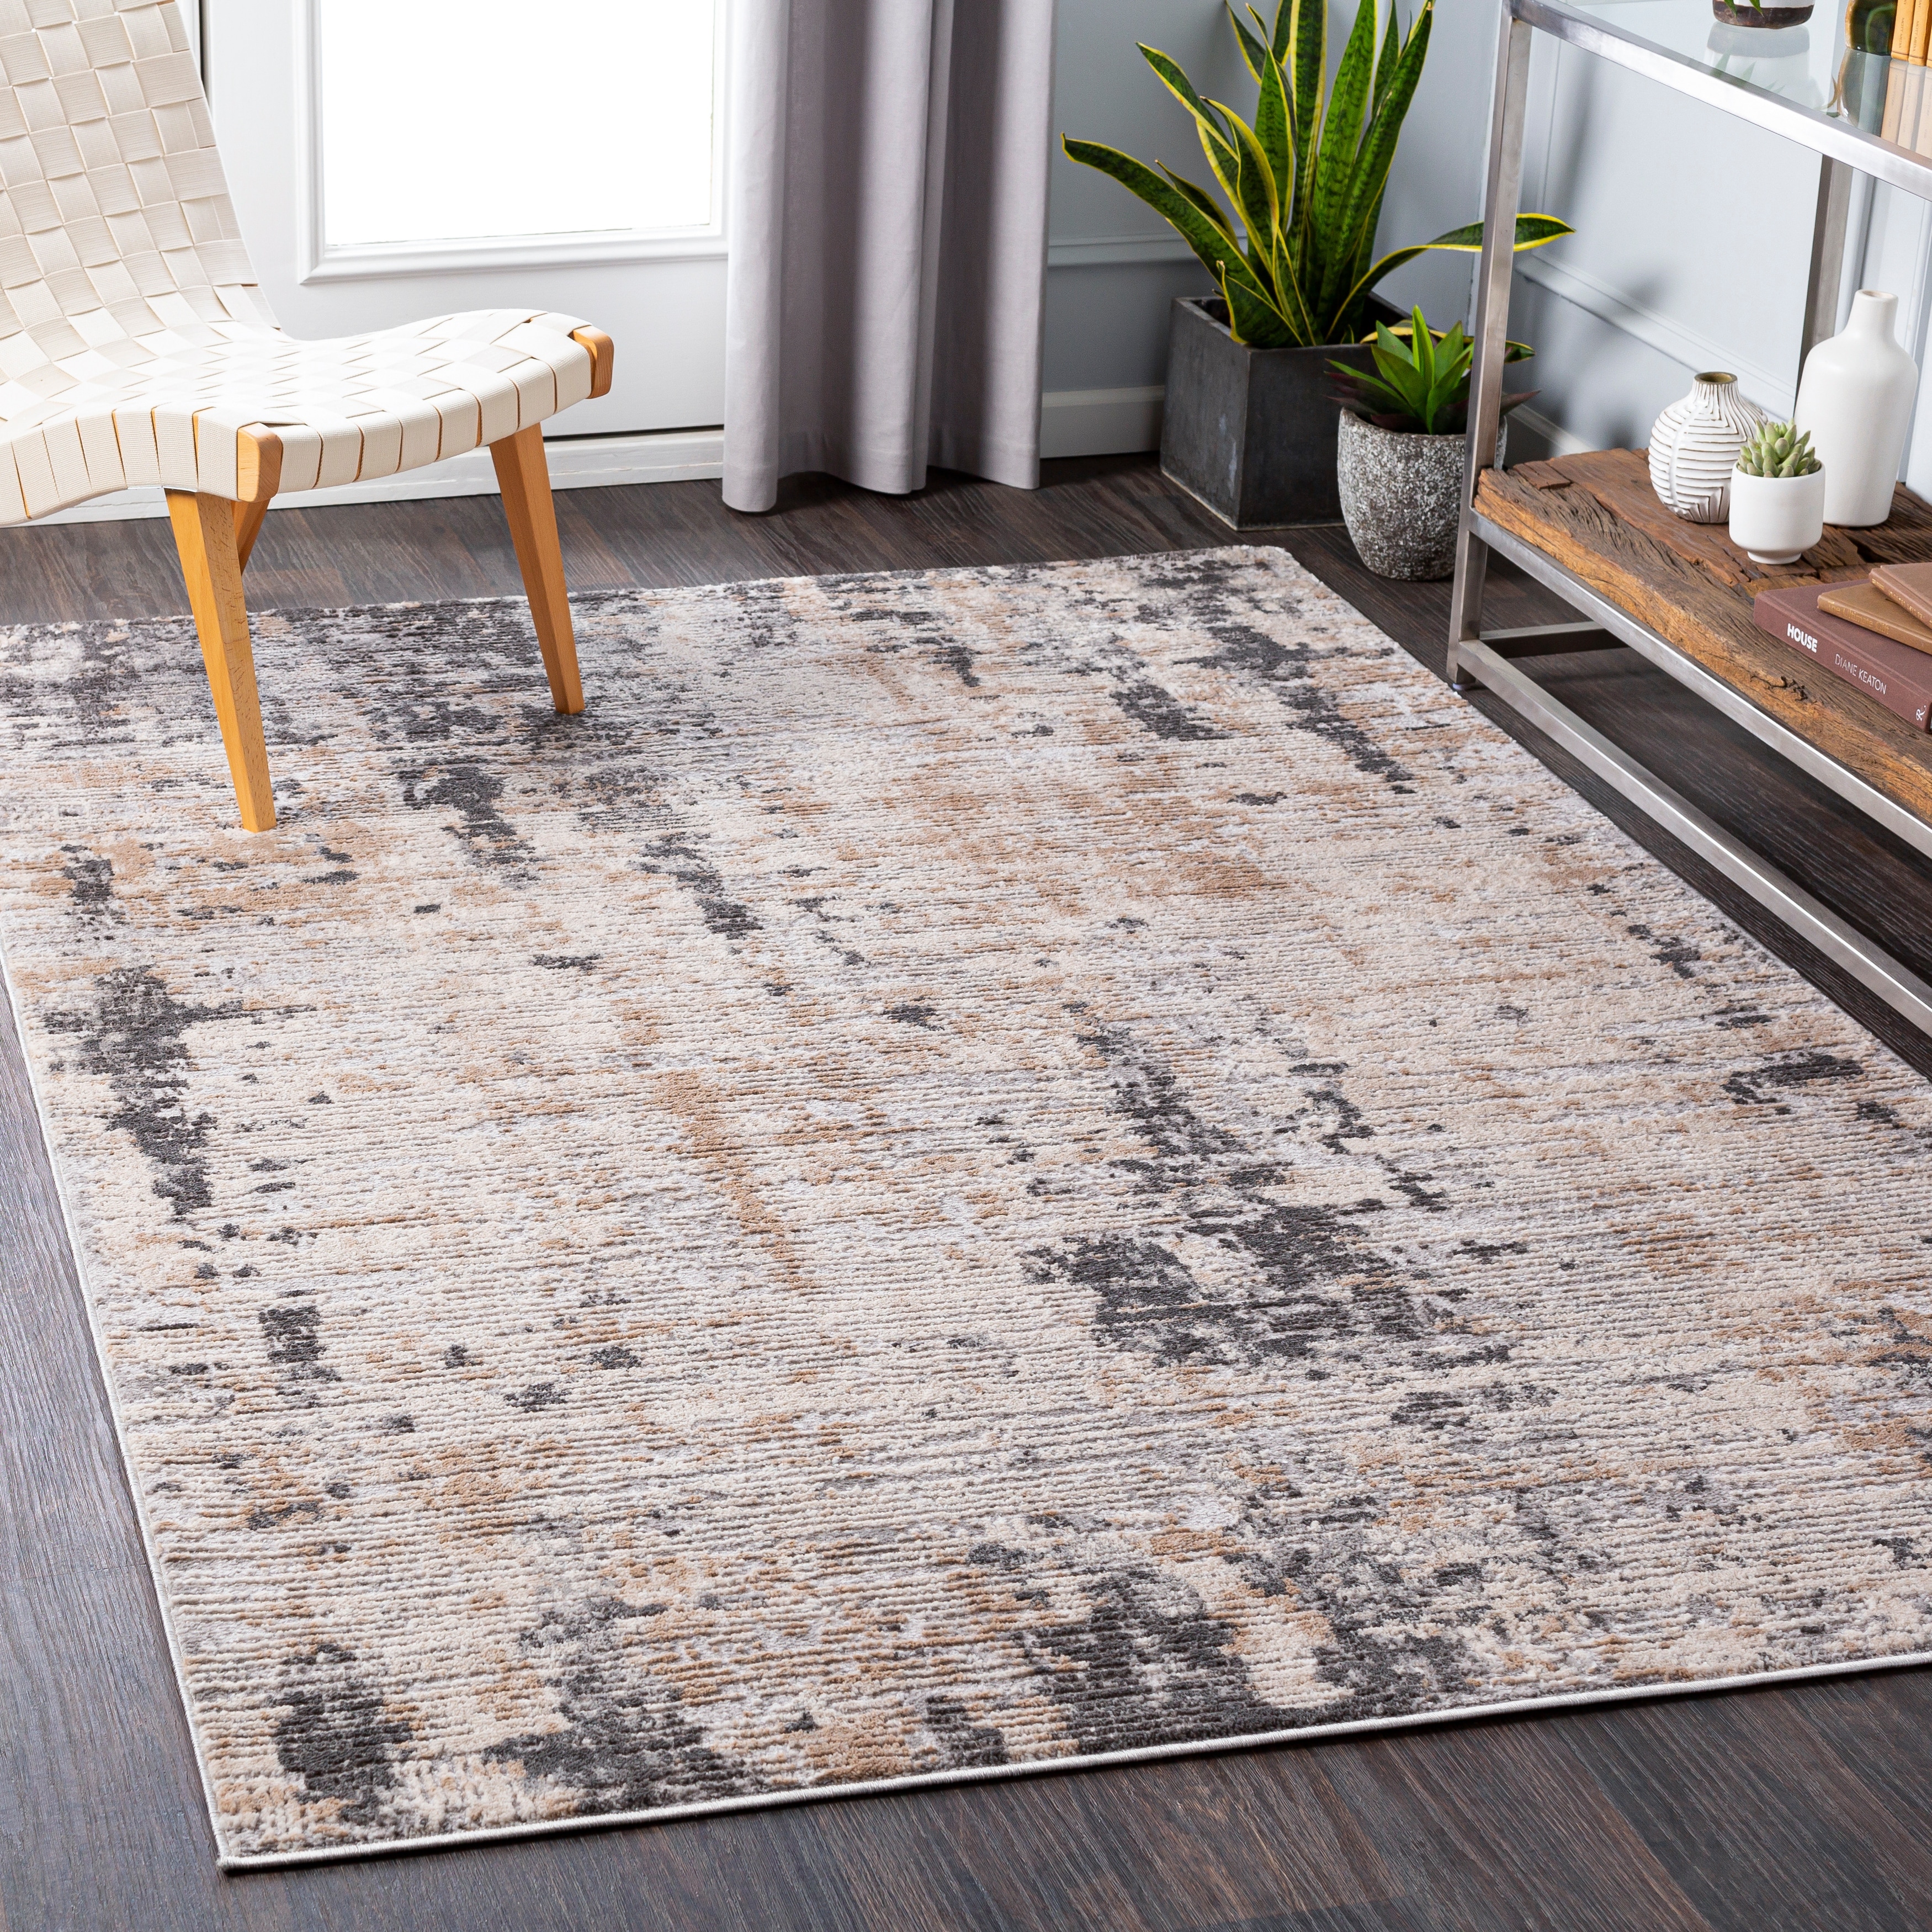 https://ak1.ostkcdn.com/images/products/is/images/direct/f290a3d1d49da3b65cfe9c7ac8aa6db88a34e557/Zasha-Modern-Abstract-Area-Rug.jpg